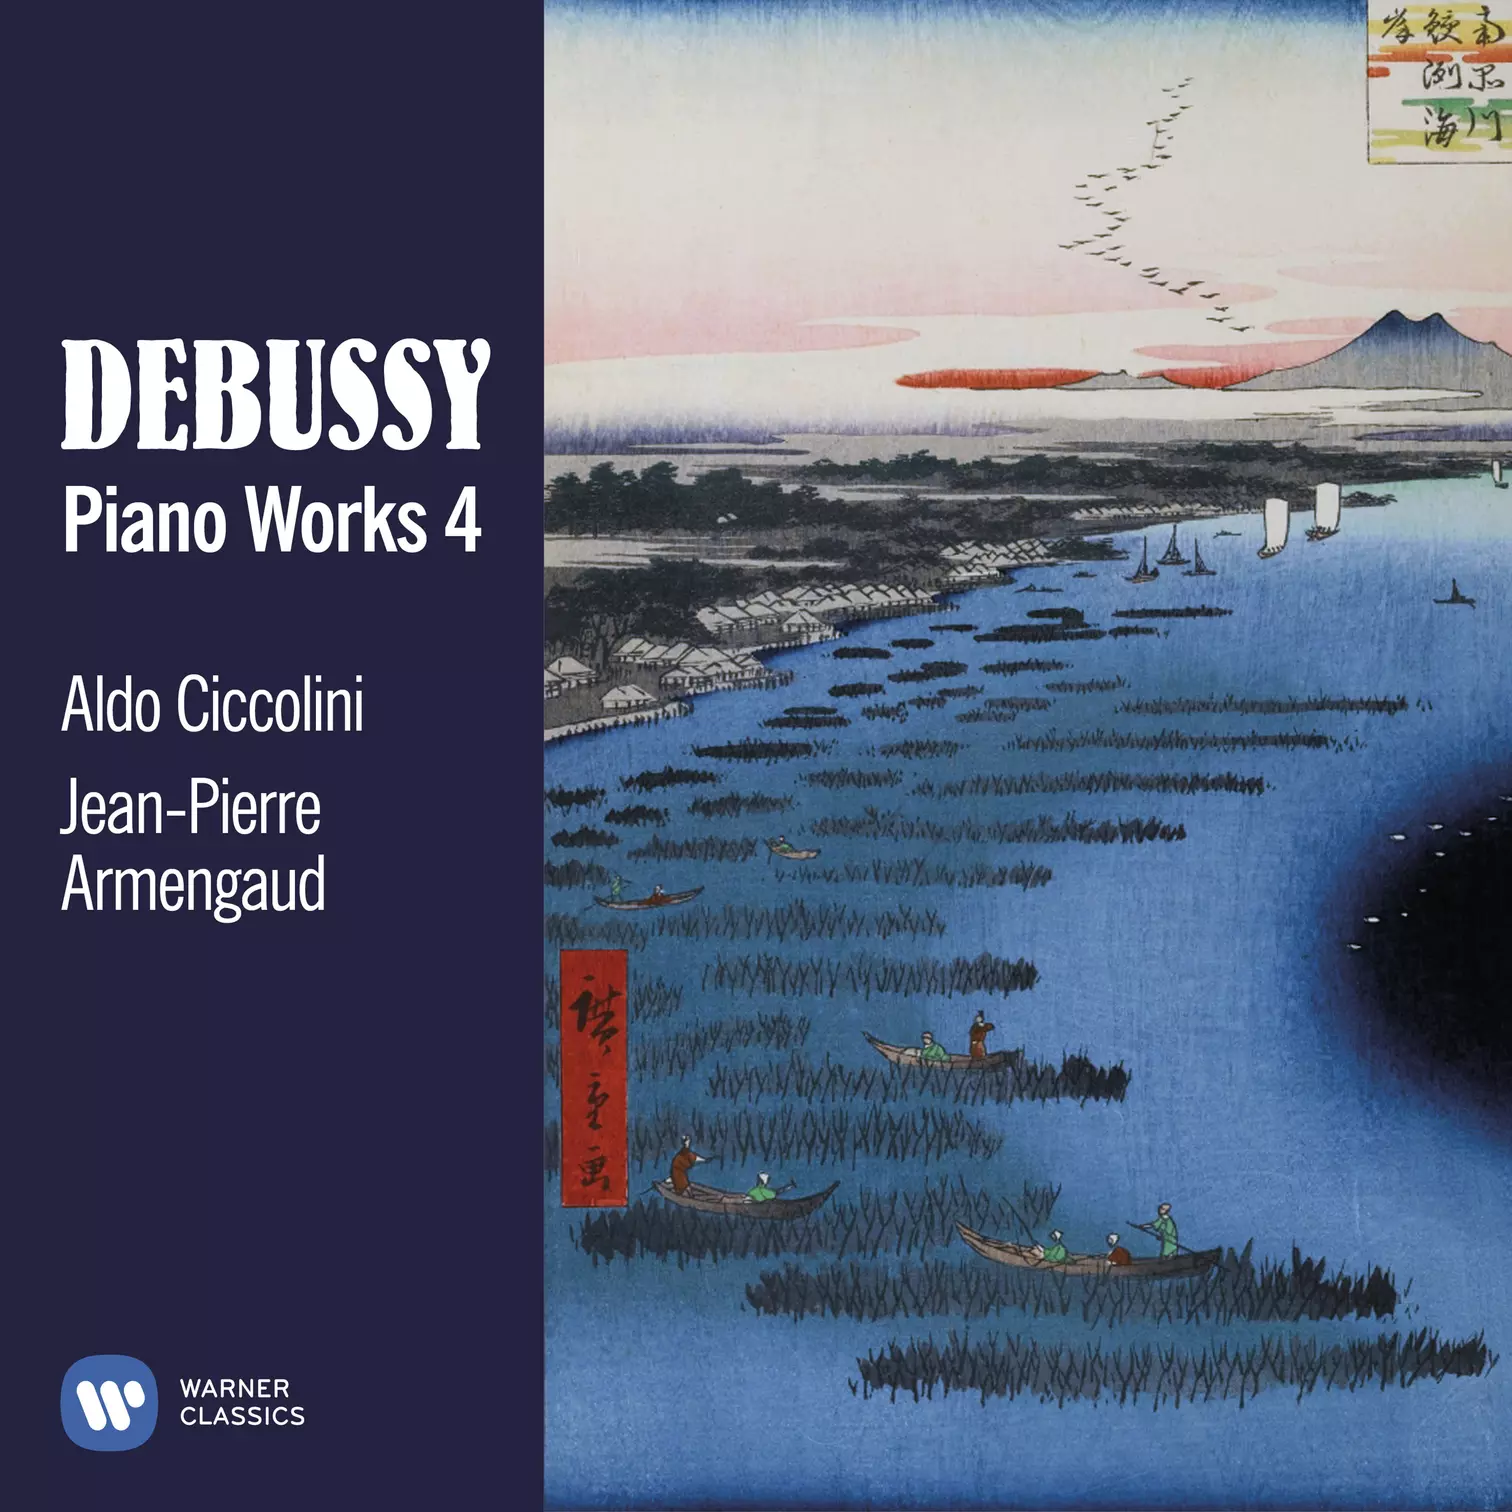 Debussy: Piano Works 4